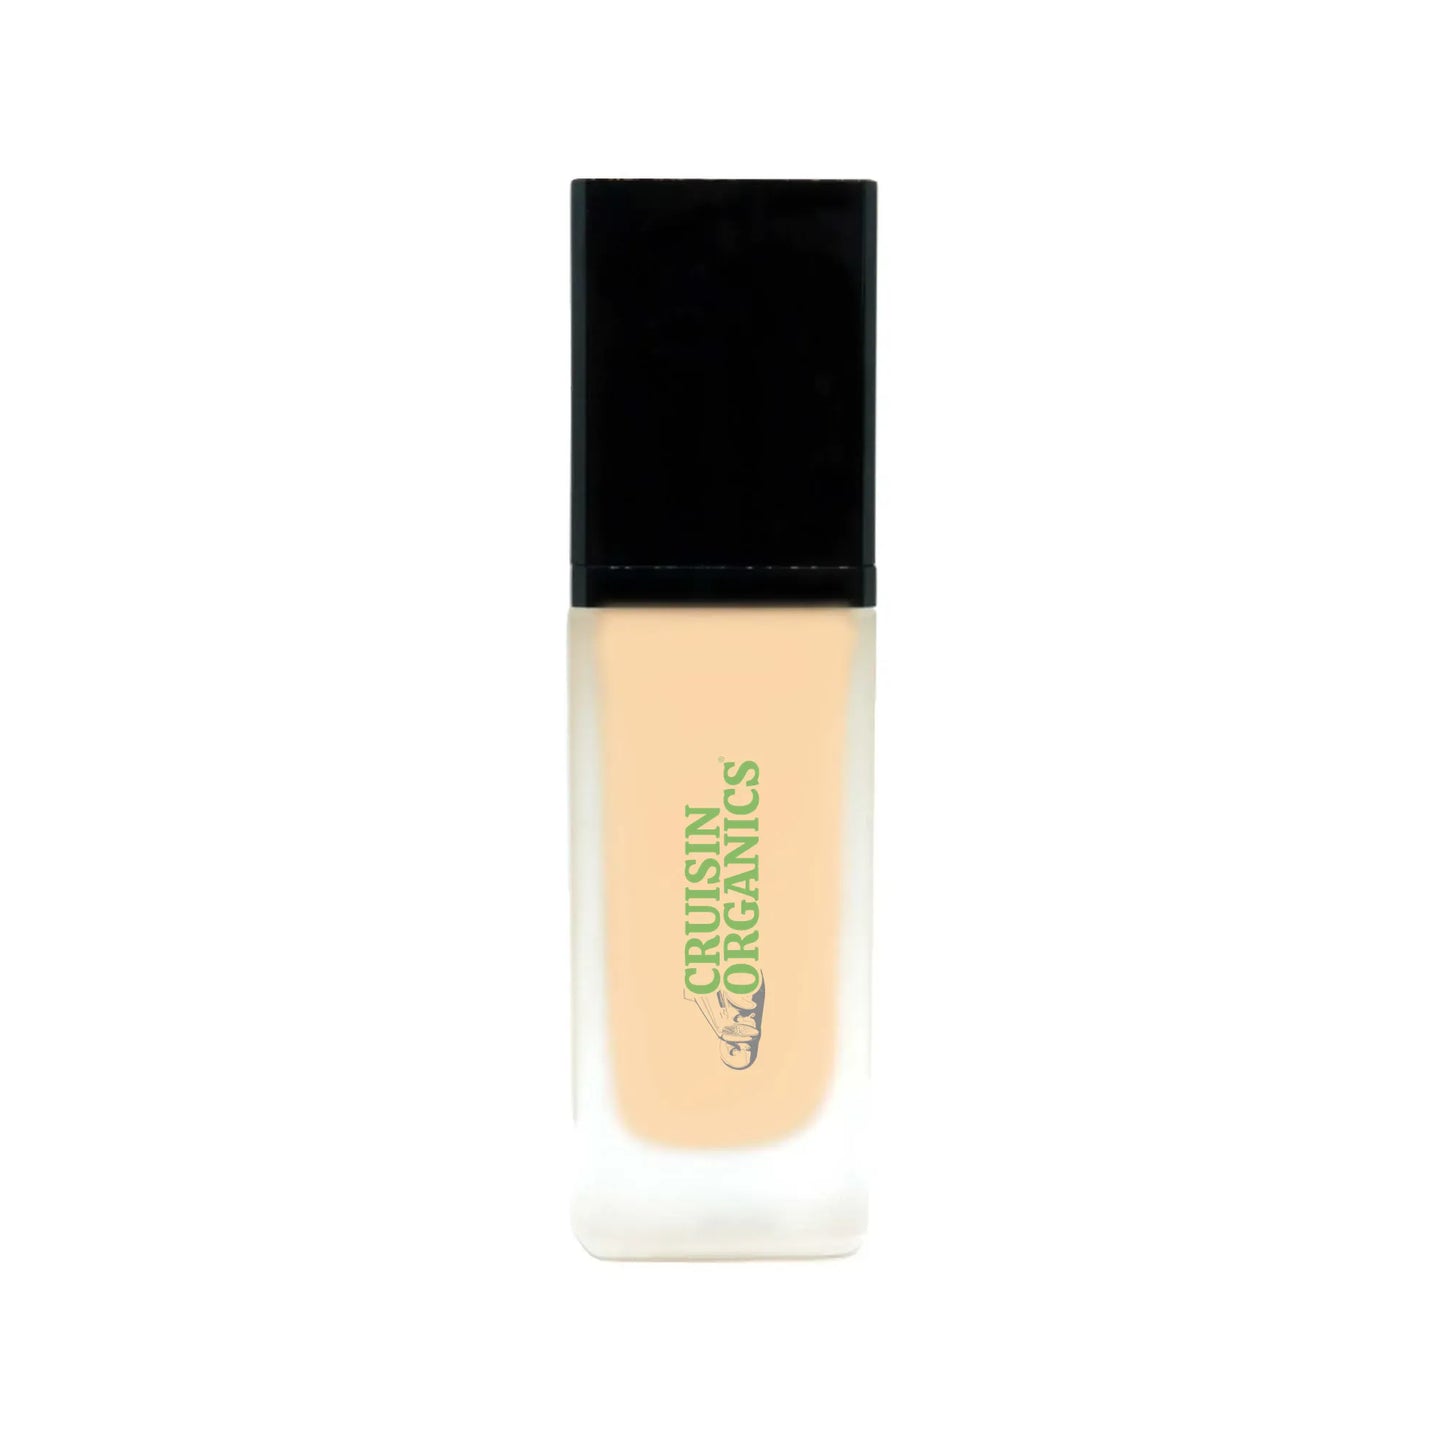 Glow with Cruisin Organics Peach Foundation! This SPF-infused foundation offers medium-to-full buildable coverage and a dewy, natural finish that will leave you looking radiant. It's the perfect choice for clients who want breathable coverage with the added bonus of SPF 15 sun protection. Don't miss out on this must-have foundation for a healthy and luminous complexion!